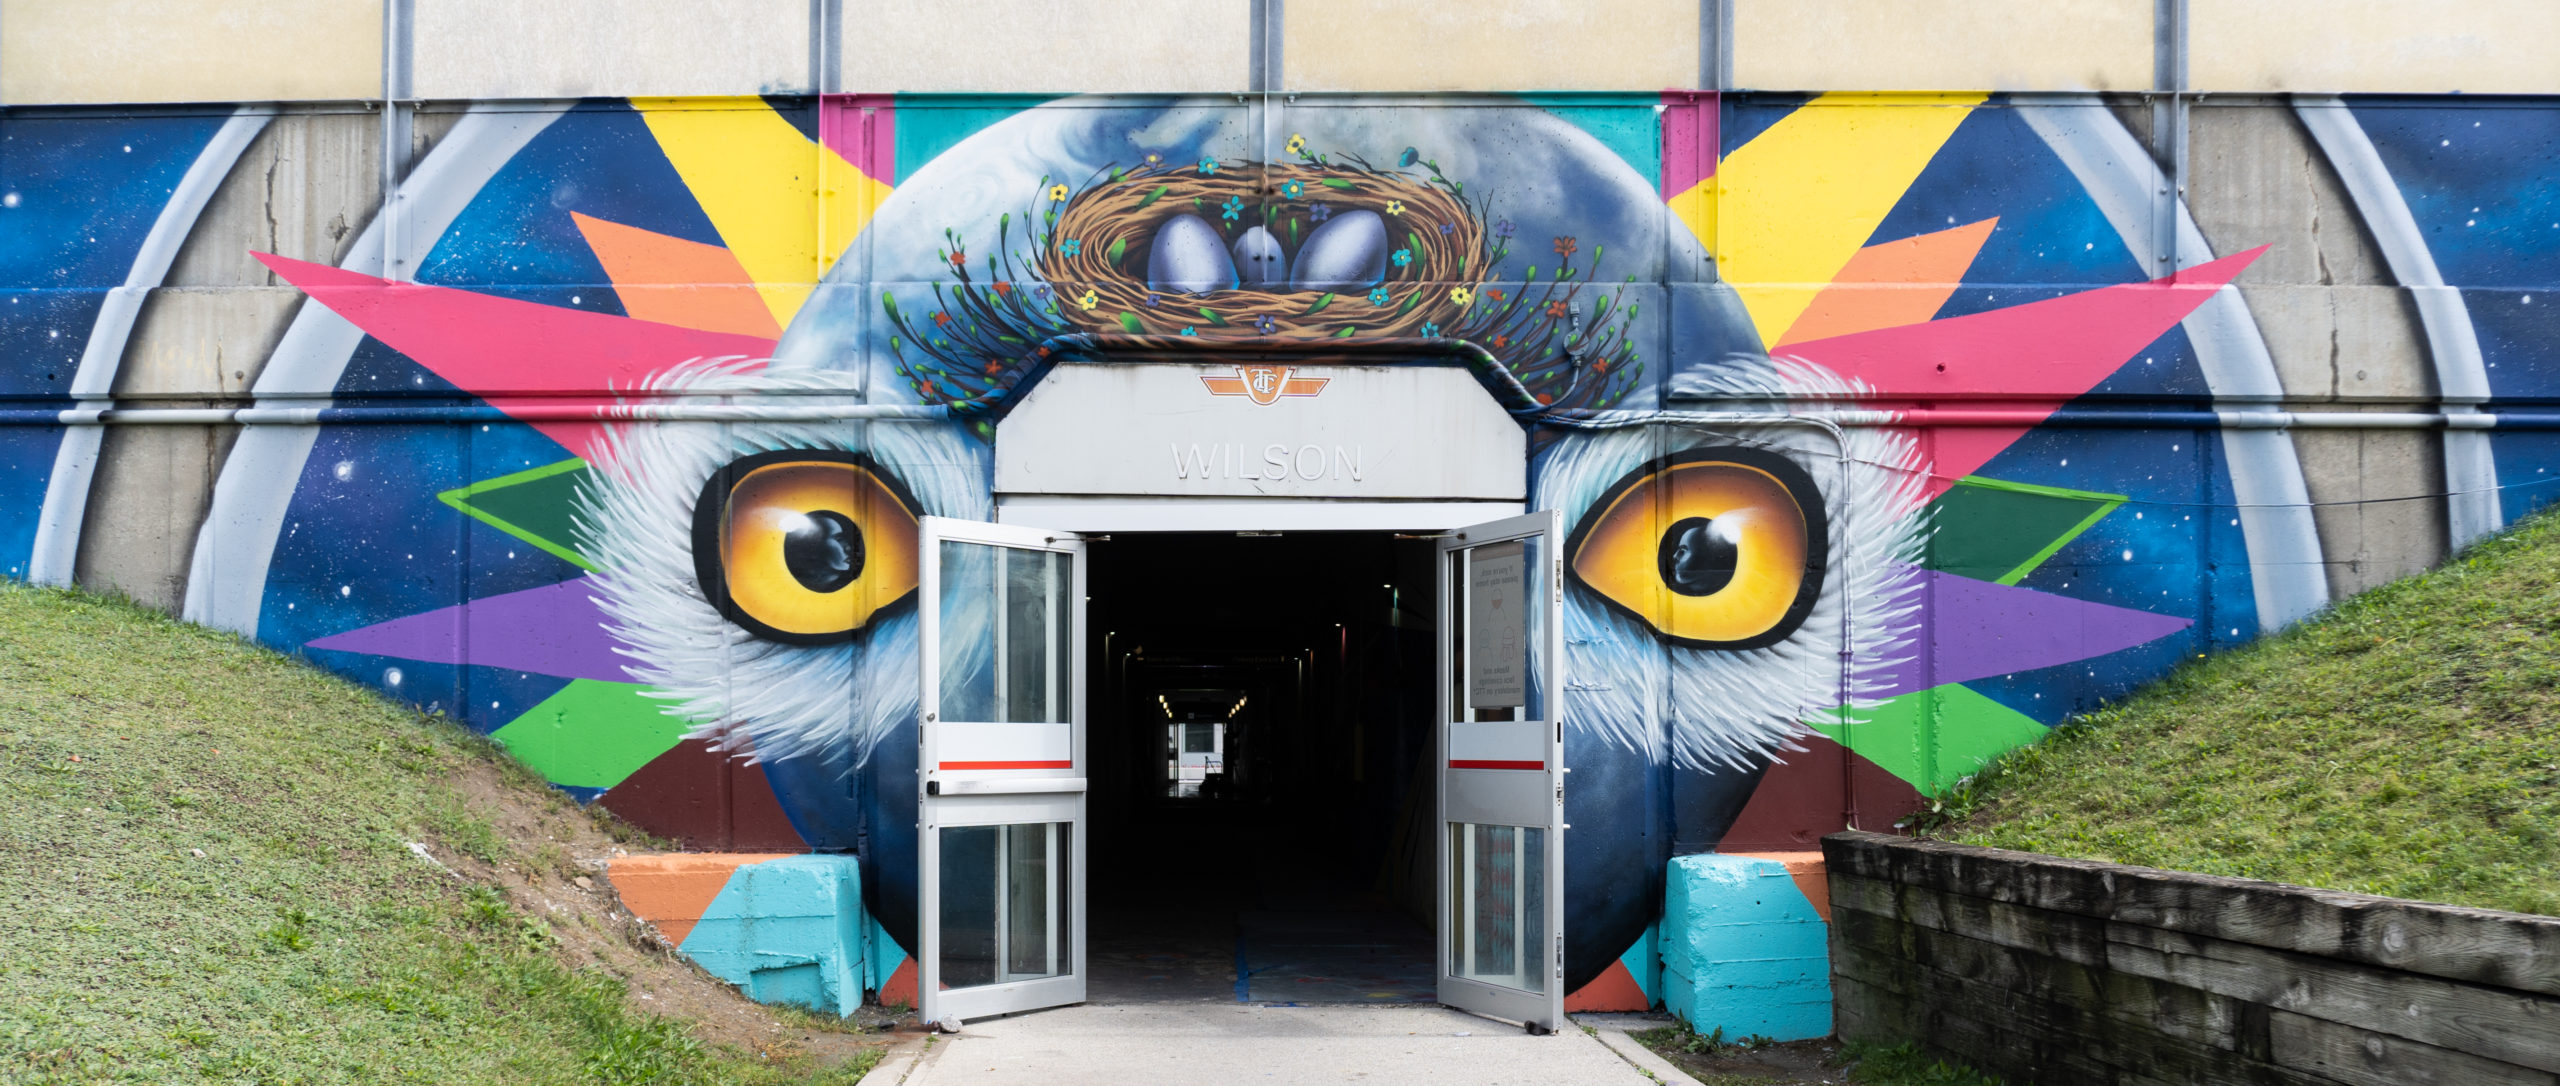 Photograph of mural by Shalak Attack at Wilson TTC Station entrance. The doors are wide open leading to the subway, the mural is of an abstracted bird with vibrant gold eyes and a blue “head” that is resemblant of a globe. There is a nest with eggs above it’s head and colourful geometric shapes radiating around the focus.